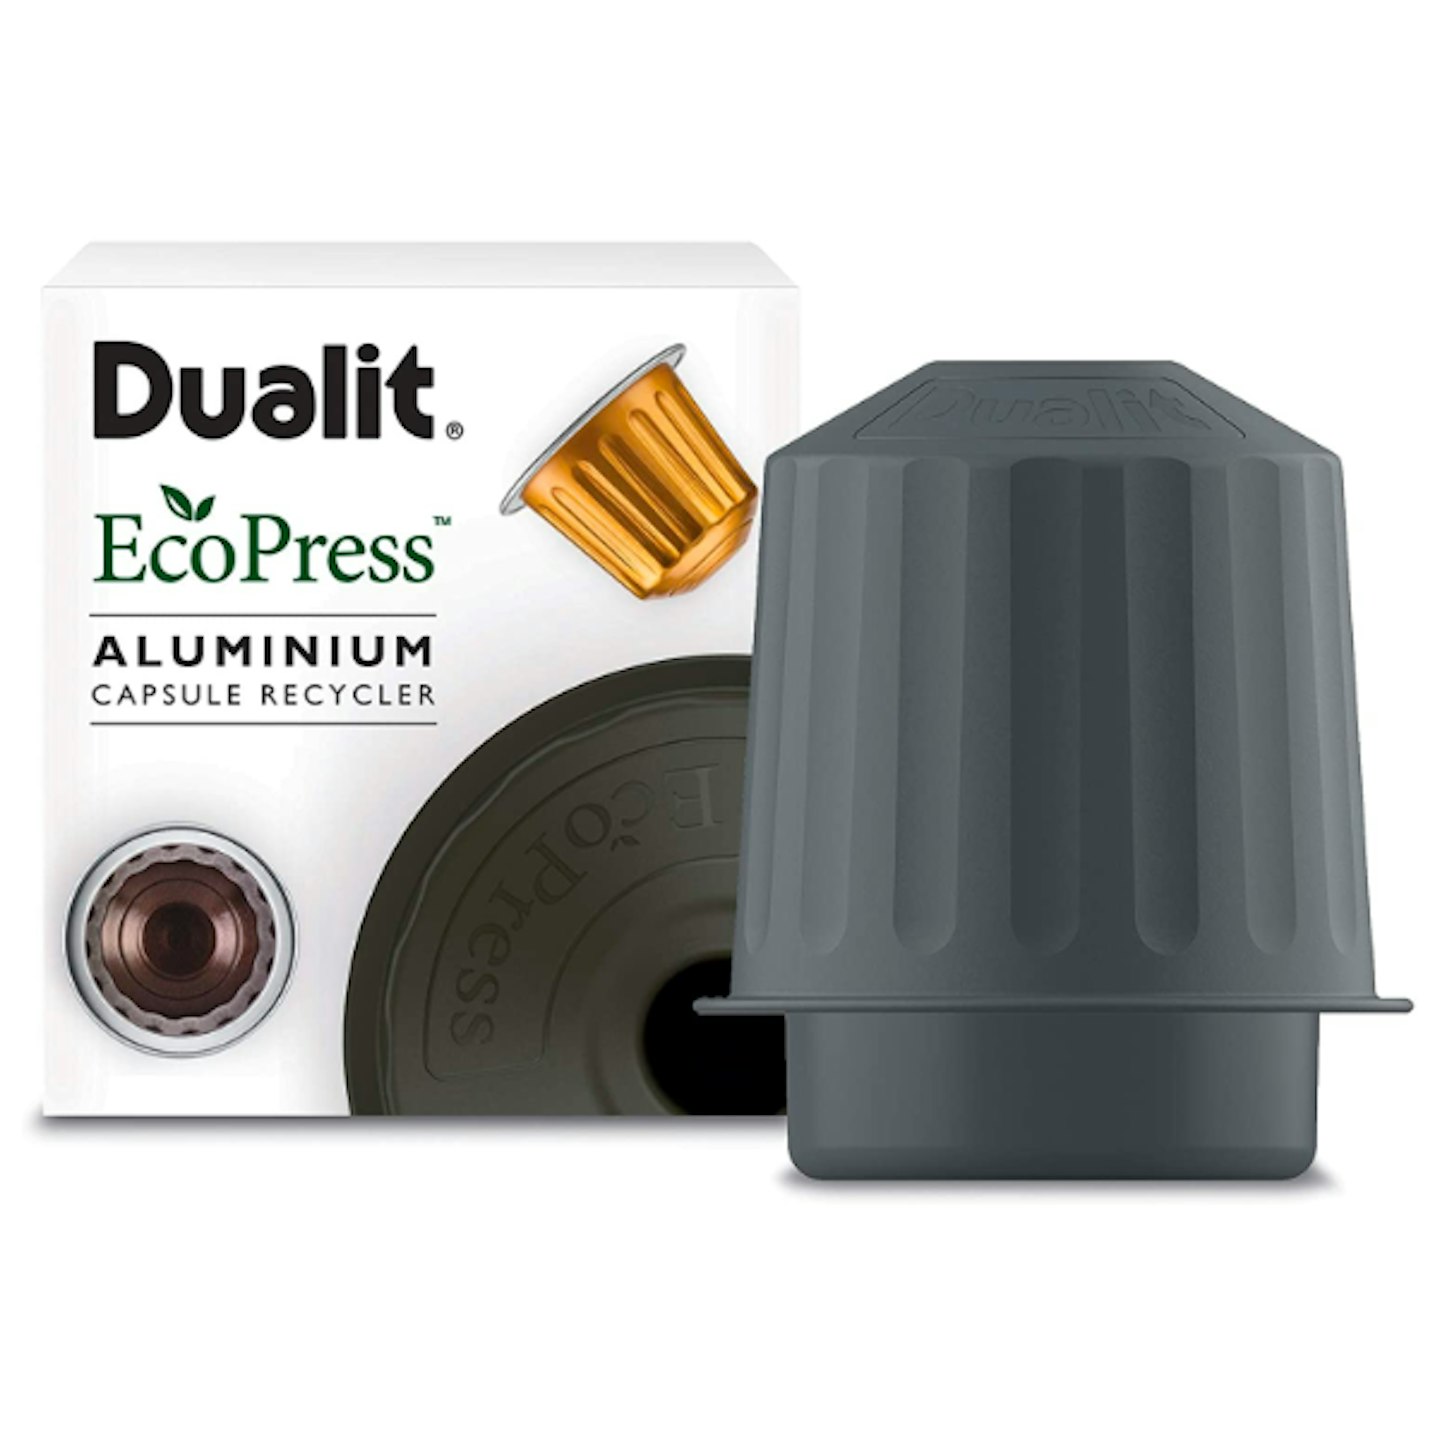 EcoPress Aluminium Coffee Capsule Recycling Tool by Dualit